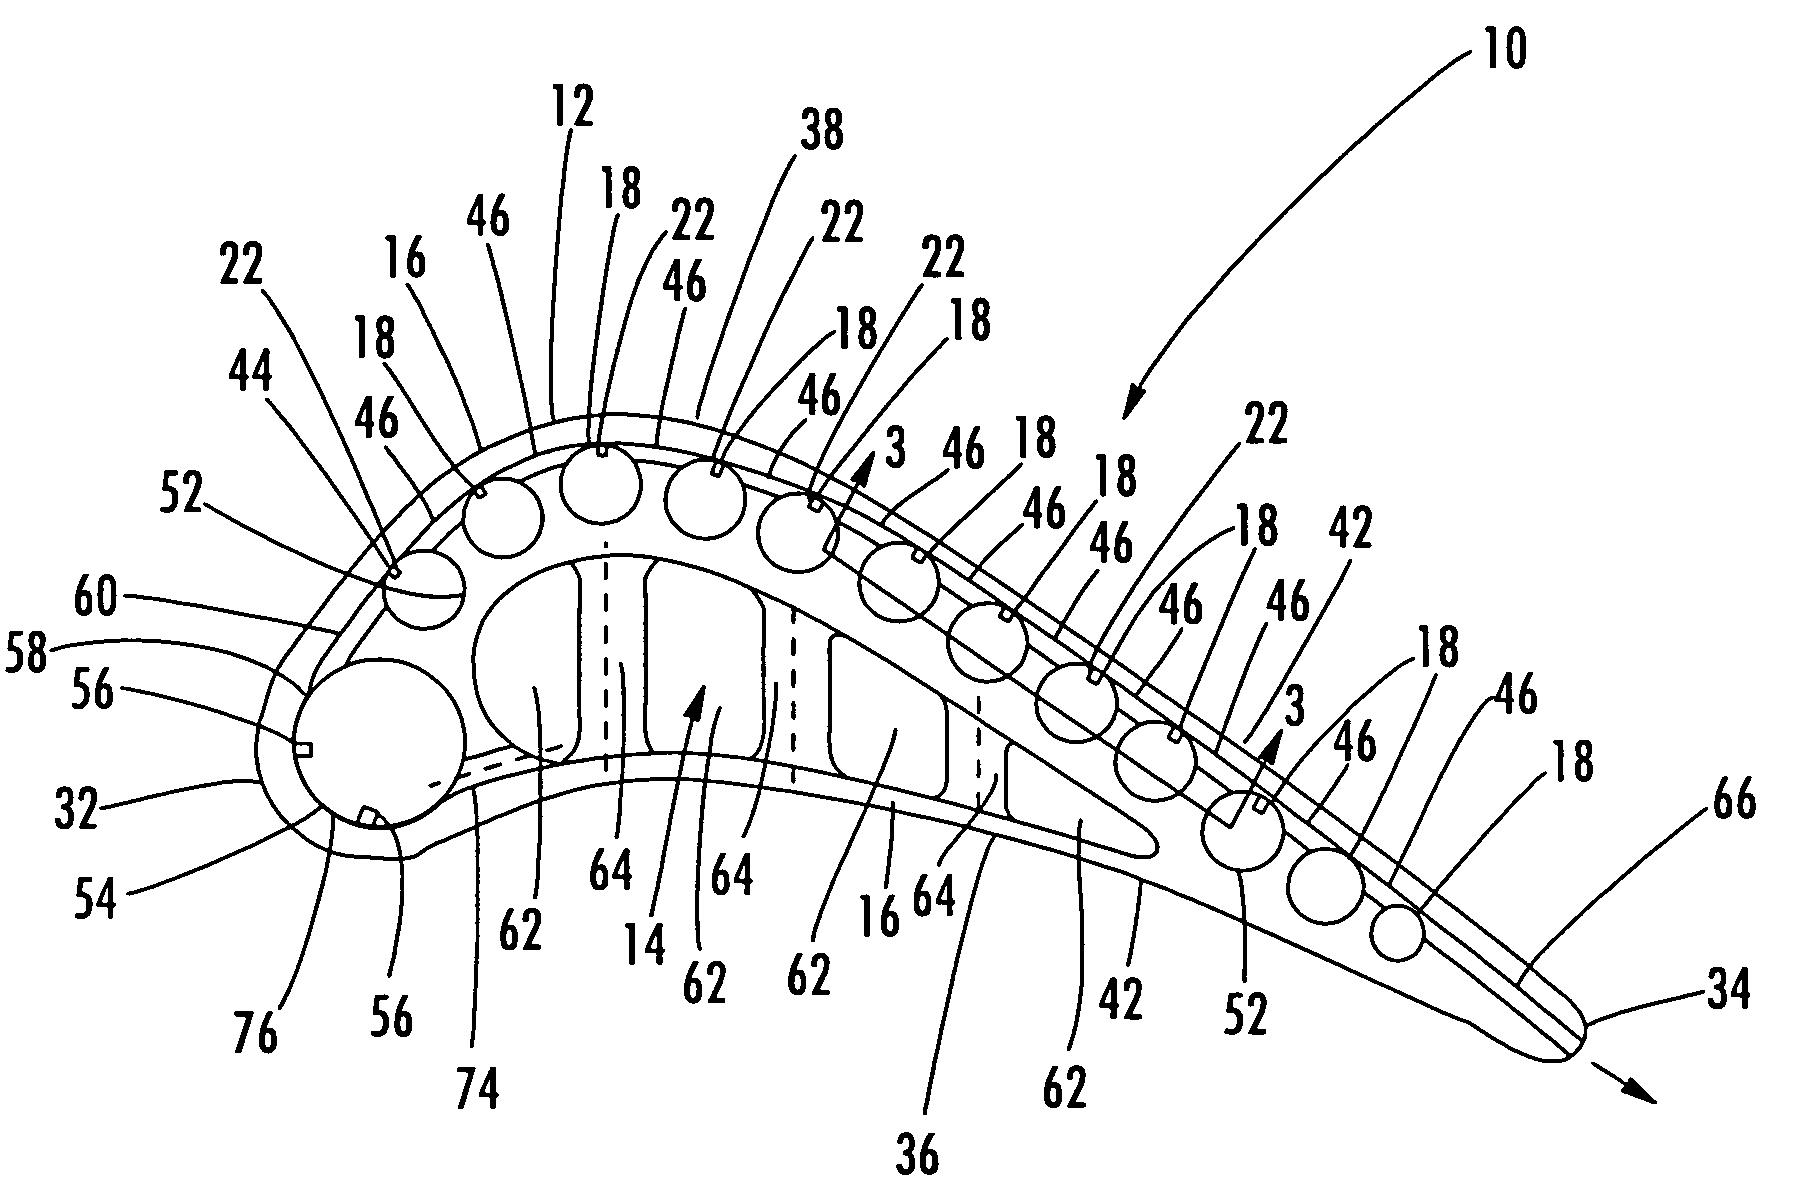 Turbine airfoil cooling system with near wall vortex cooling chambers